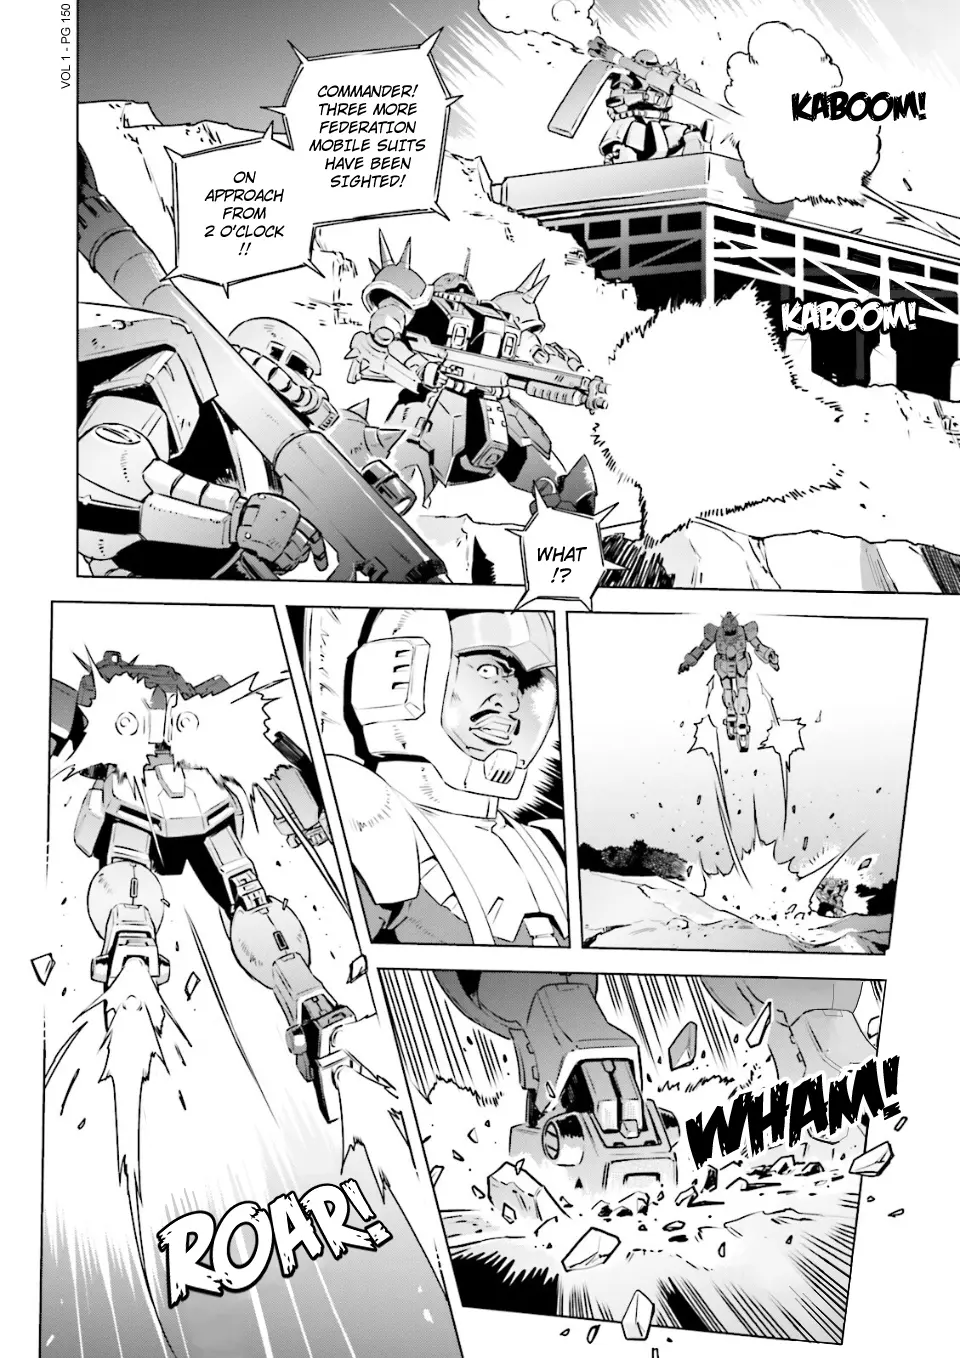 Mobile Suit Gundam Side Story - Missing Link - 6 page 3-7ddc9443